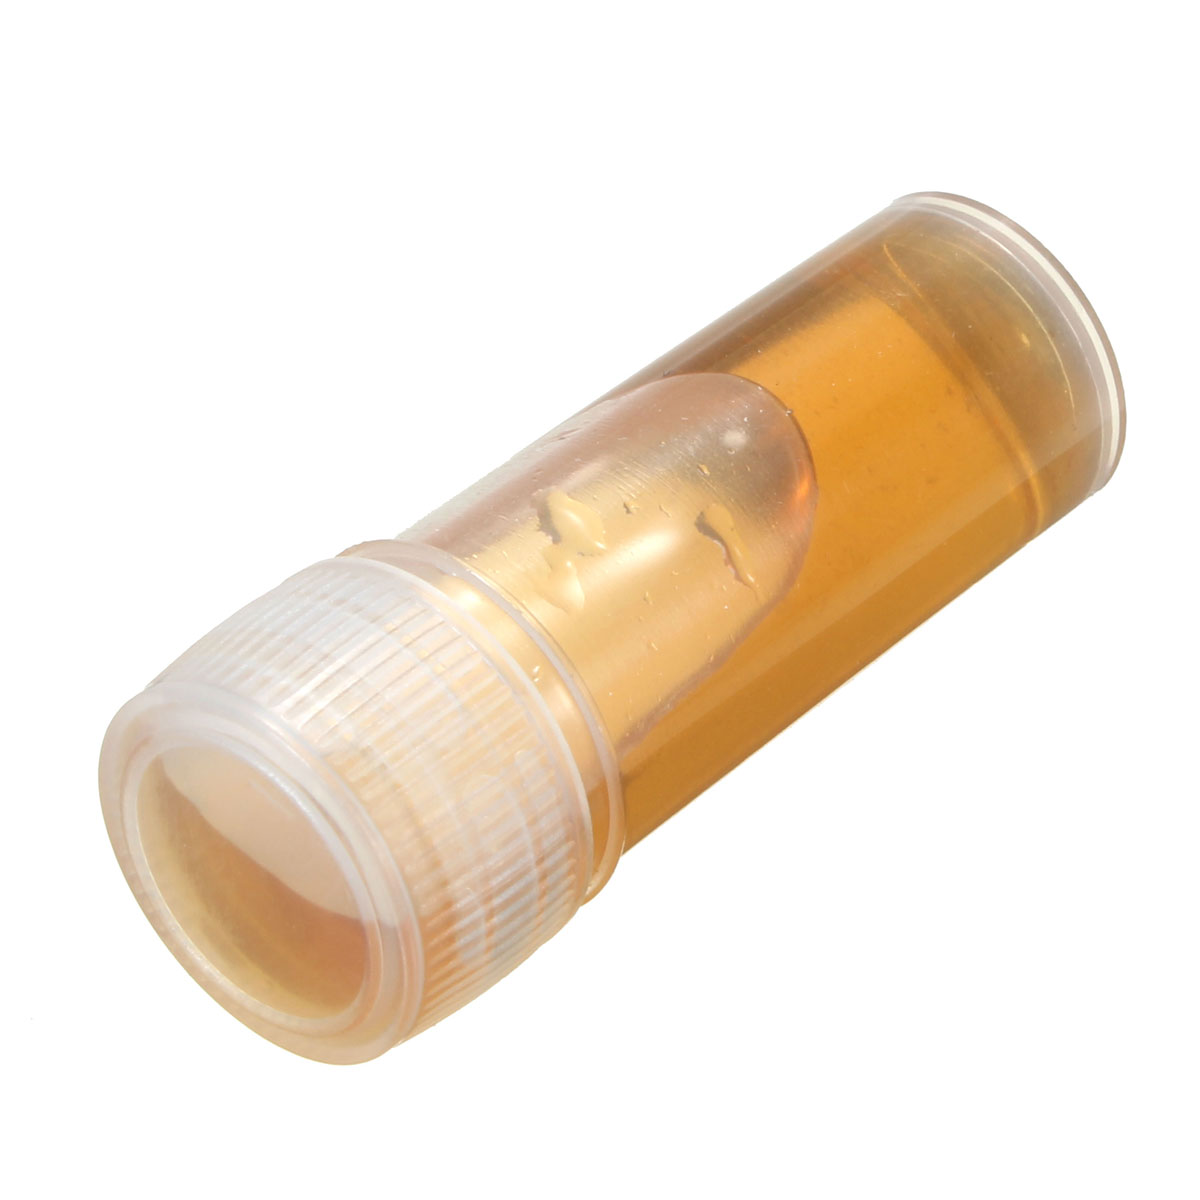 20Pcs-5ml-Chemistry-Plastic-Test-Tube-Vials-with-Seal-Caps-Pack-Container-1300038-7